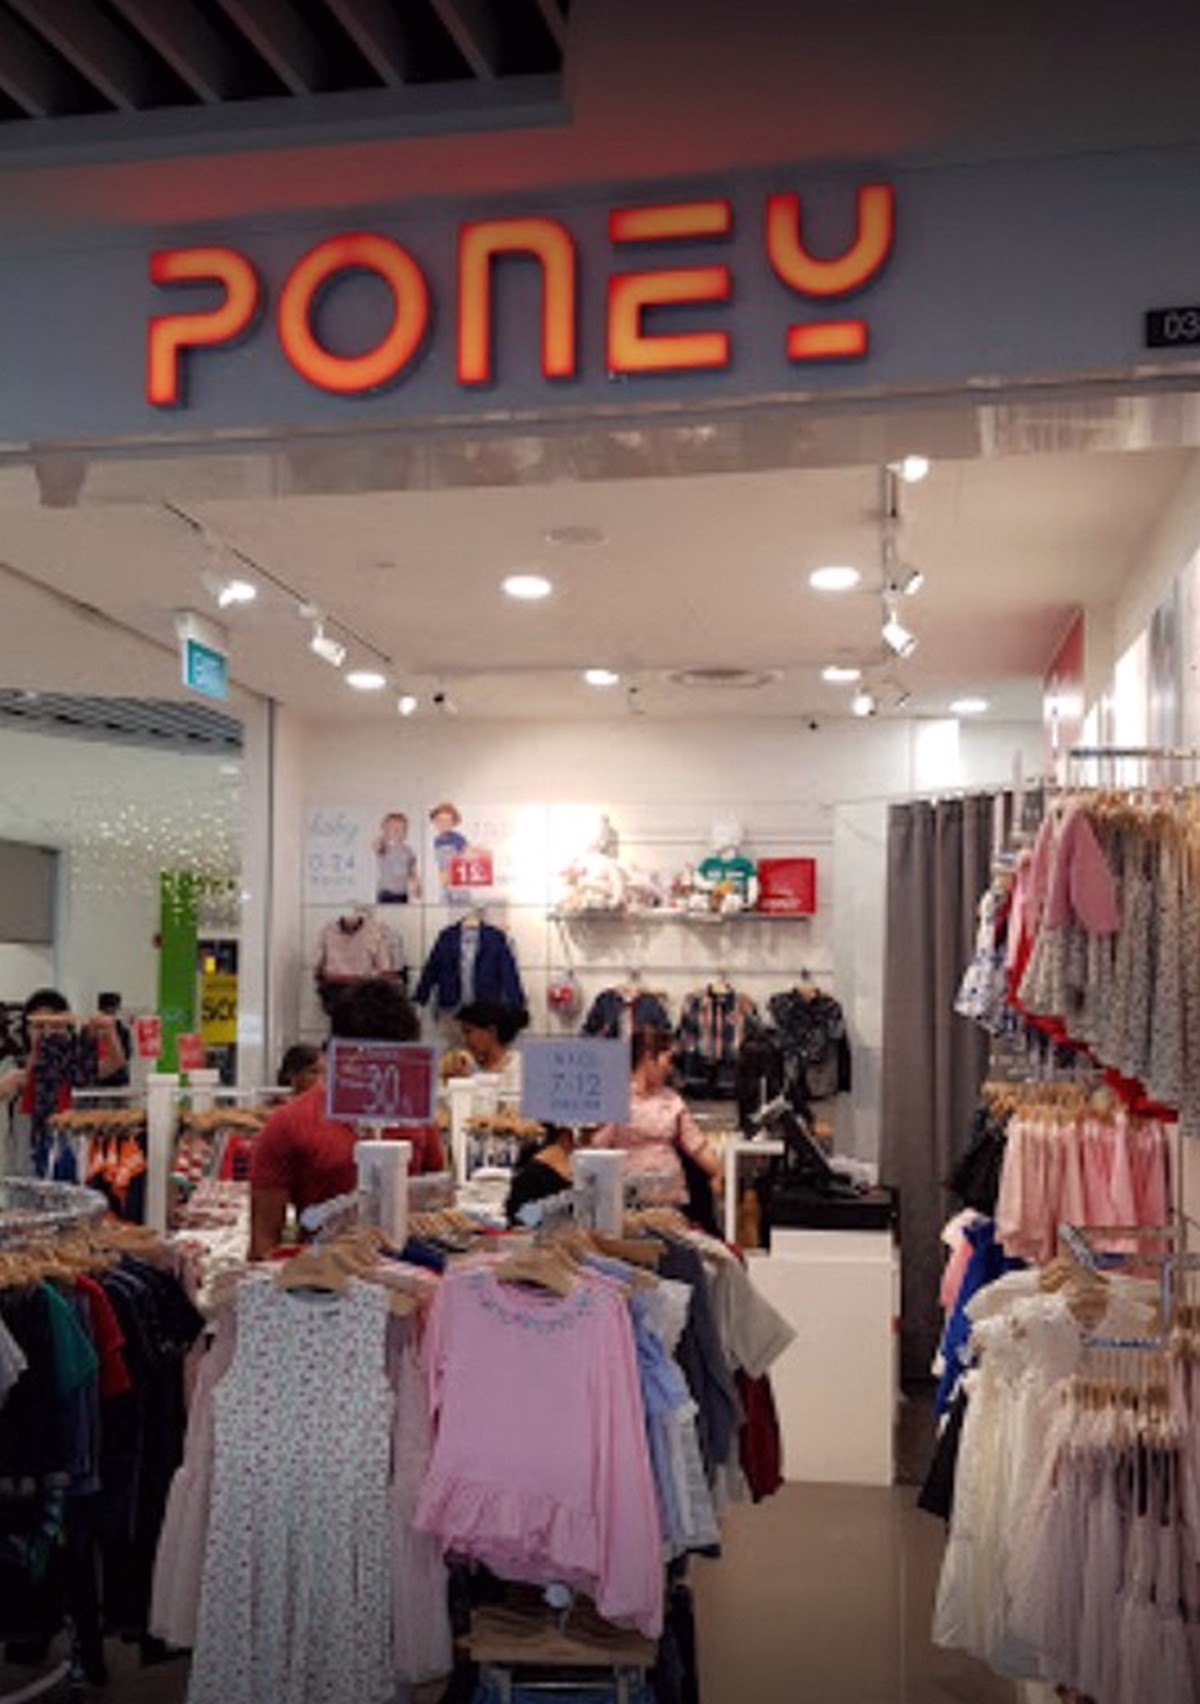 compass-one-poney-Google-Search3 16 Apr-16 May 2021: Poney Kid Apparel Sale at Compass One! Up to 60% OFF!